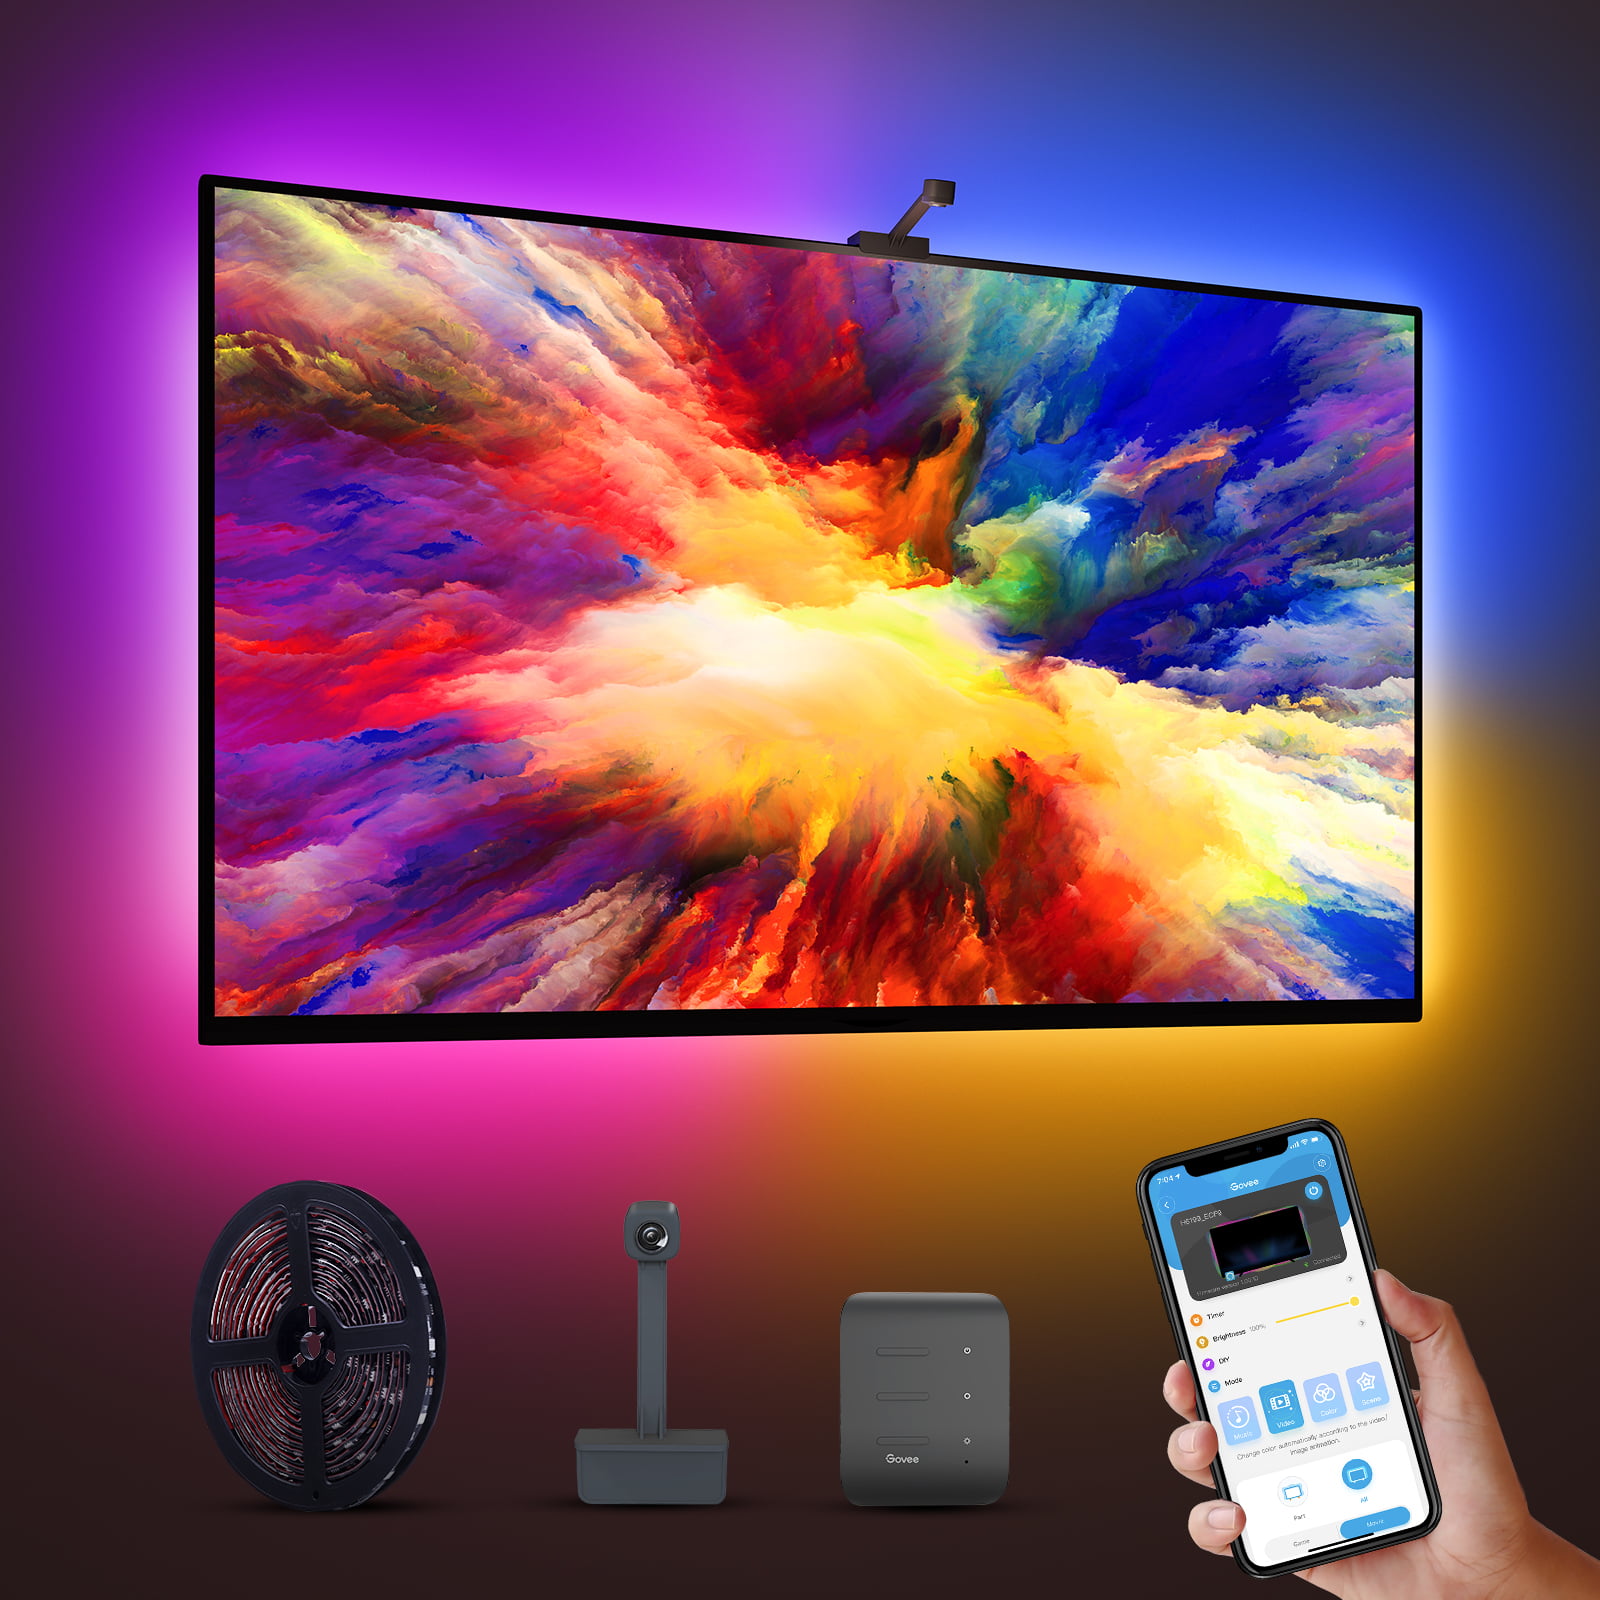 Black Friday Govee: super offer on Ambilight-style LEDs for TV